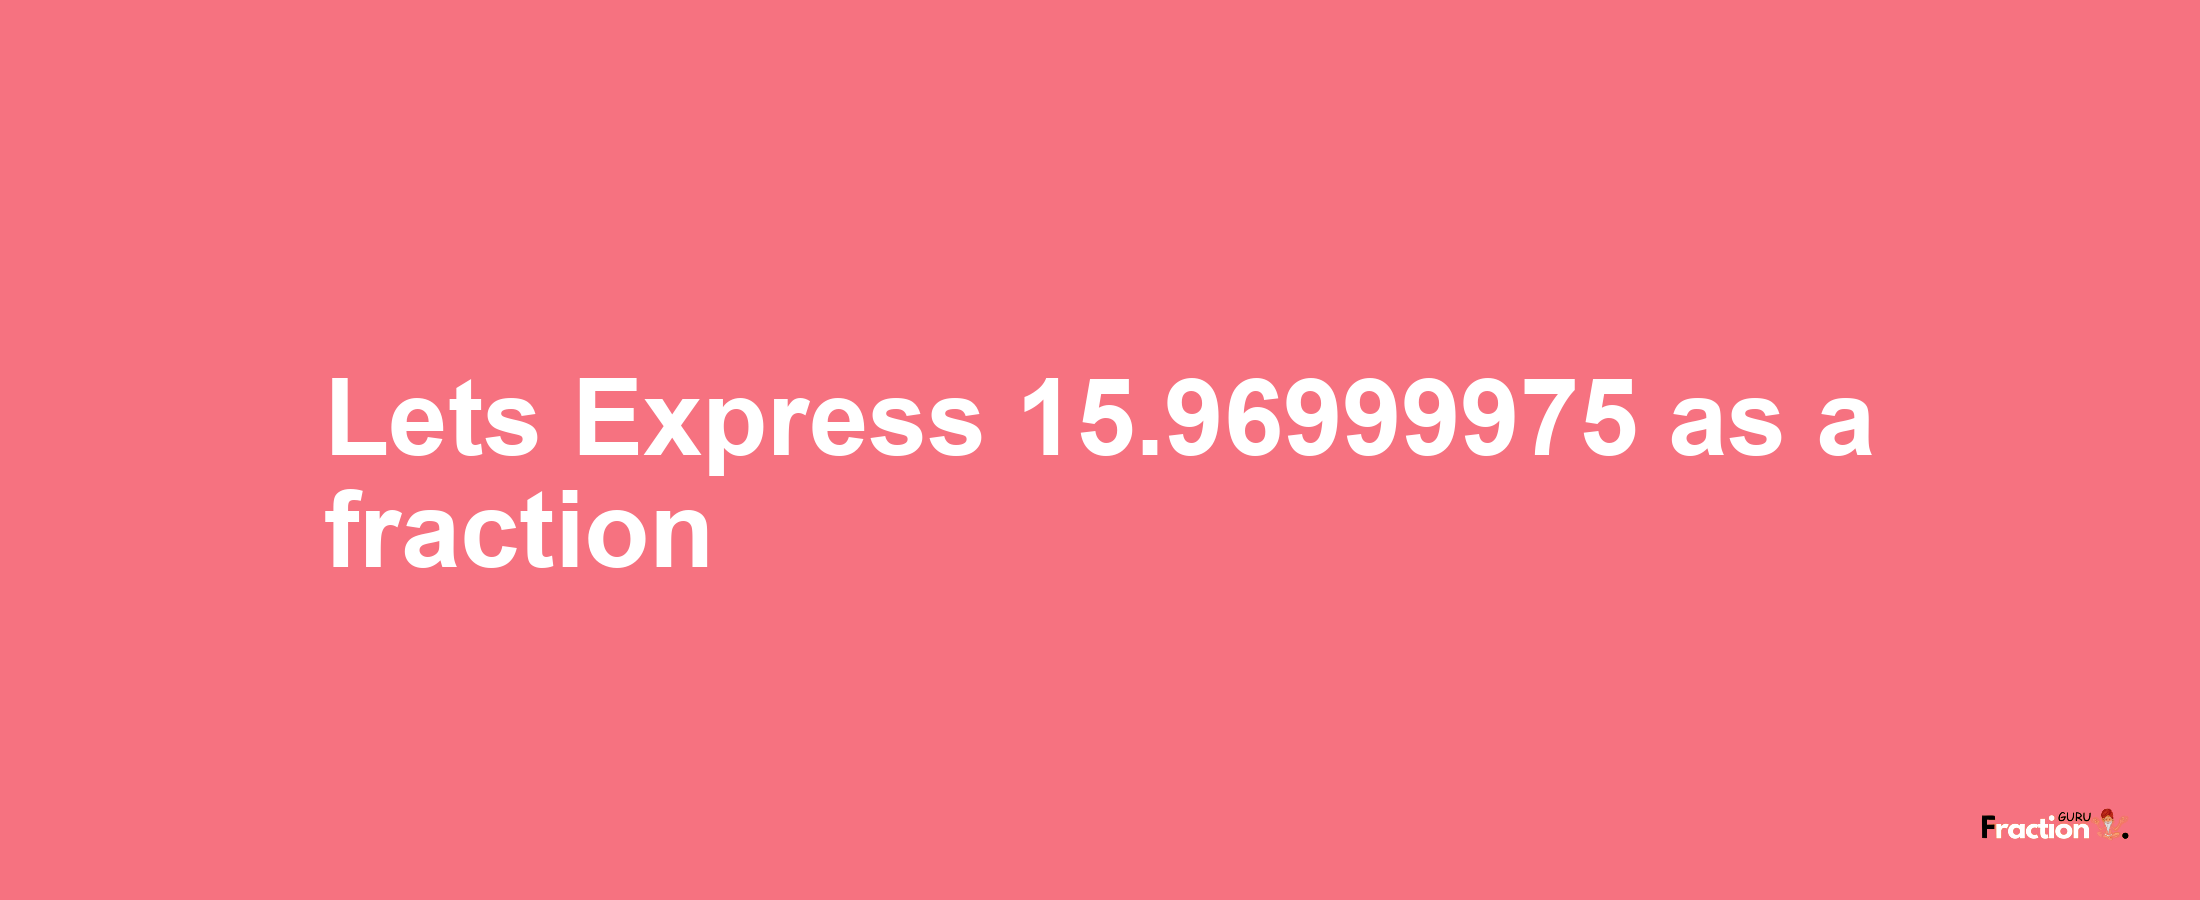 Lets Express 15.96999975 as afraction